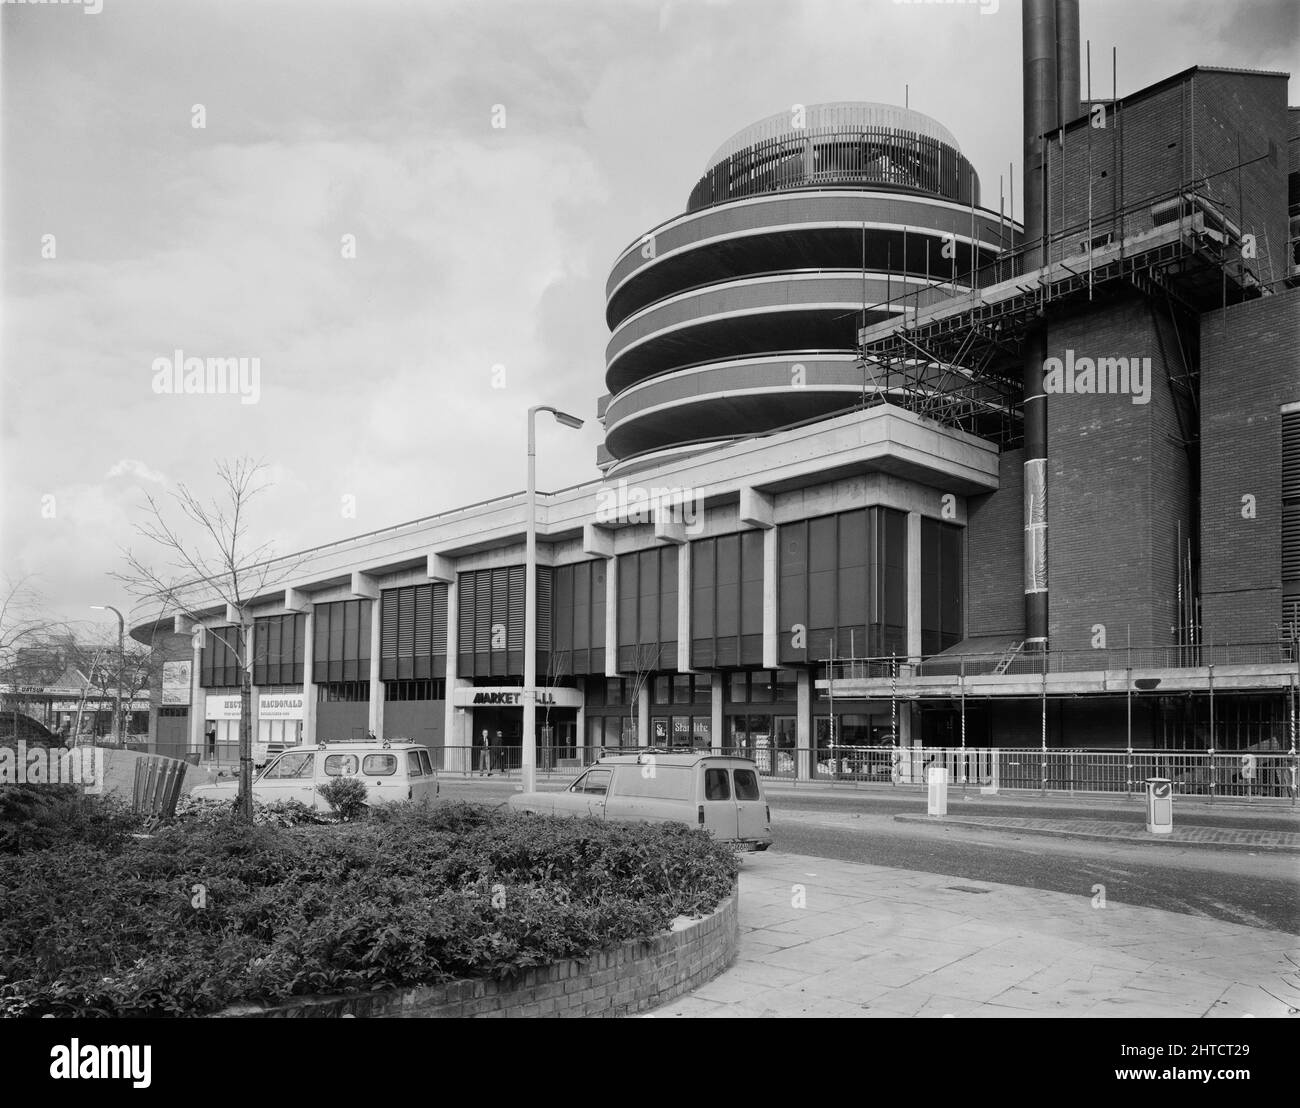 Wood Green Shopping City, Haringey, London, 11/02/1980. A view of the Mayes Road entrance to the Market Hall at Wood Green Shopping City, with the spiral ramps of the west car park rising above. Wood Green Shopping City, later renamed The Mall Wood Green, is a large shopping centre and housing complex. The site has a unique design, with the A105 (High Road) running through its centre, and a housing complex known as 'Sky City' built on top of the shop units. Laing's London Region were responsible for the construction of various sections of the site in the 1970s to early 1980s. The most notable Stock Photo